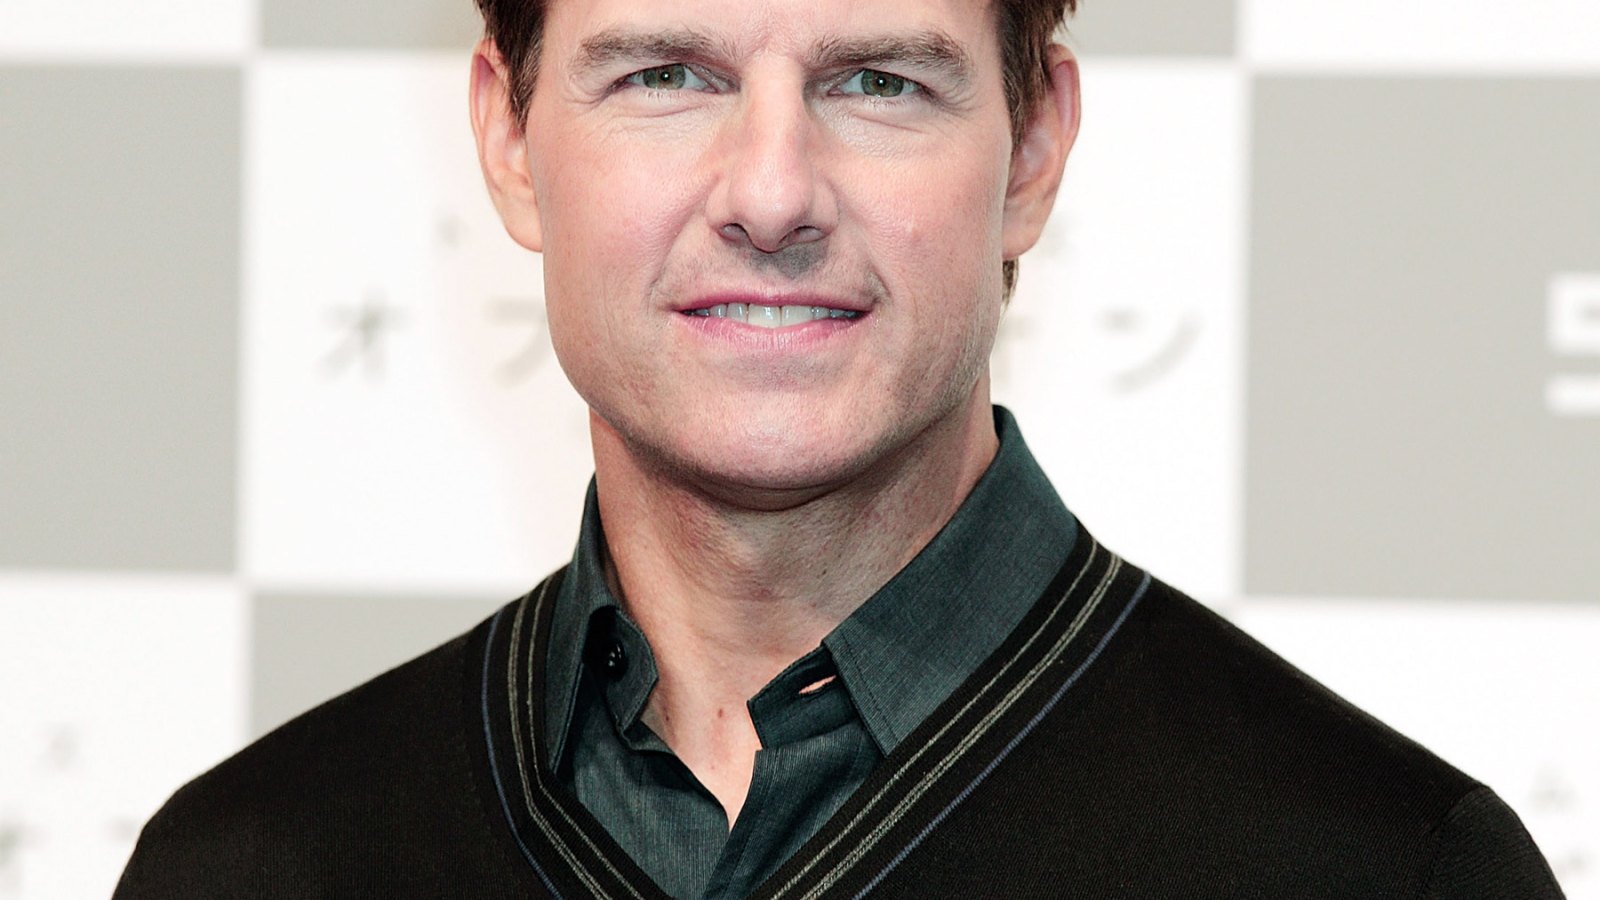 Tom Cruise on May 7, 2013 in Tokyo, Japan